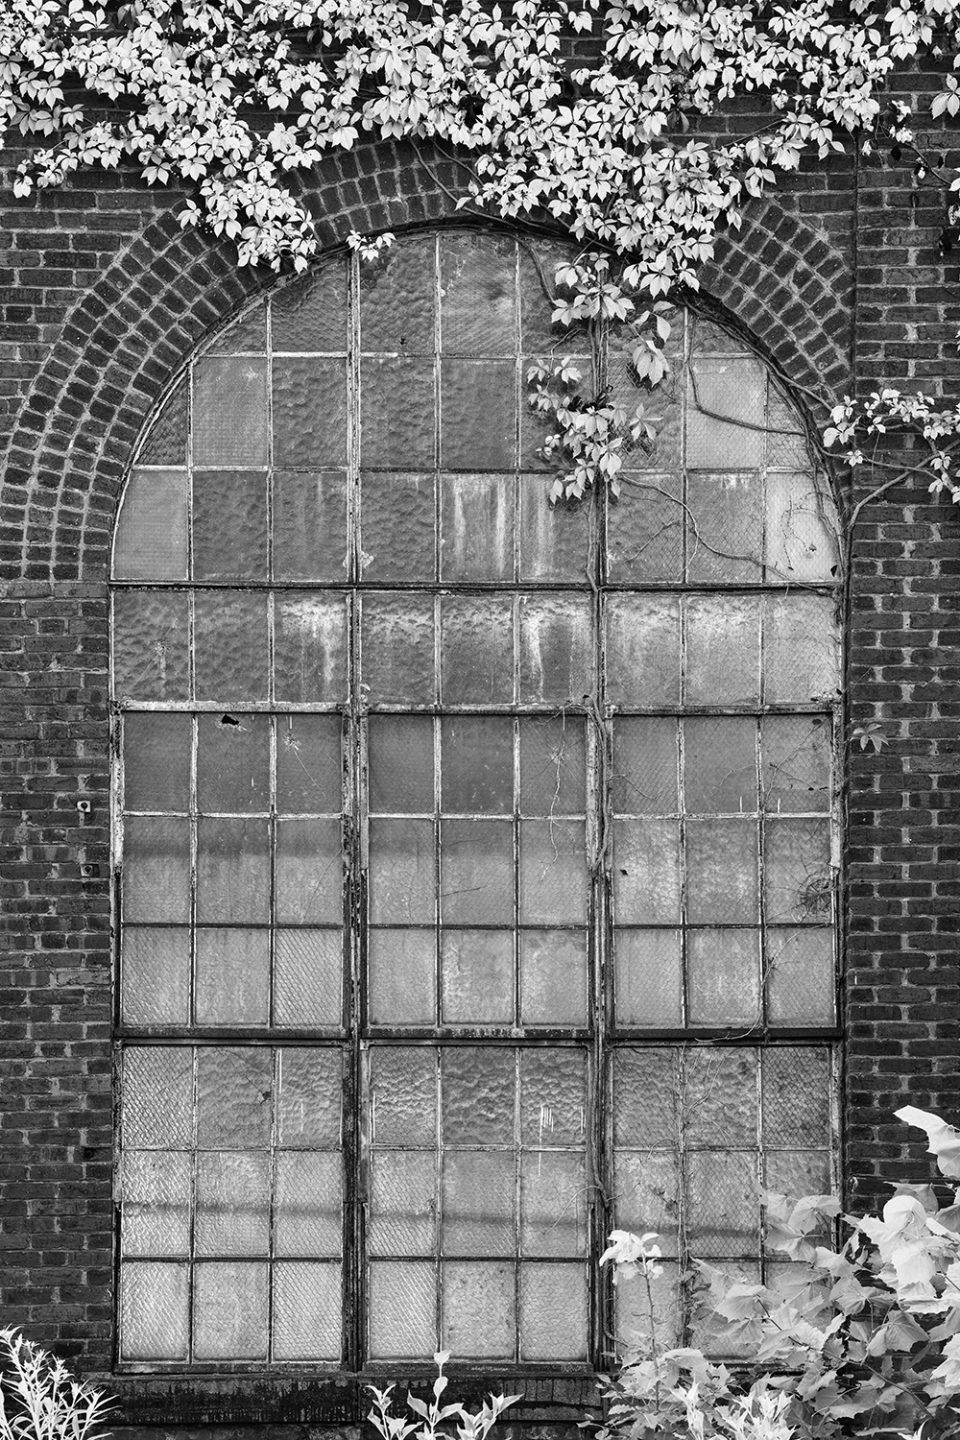 Old Industrial Windows with Ivy: Black and White Photograph by Keith Dotson. Buy a fine art print here.